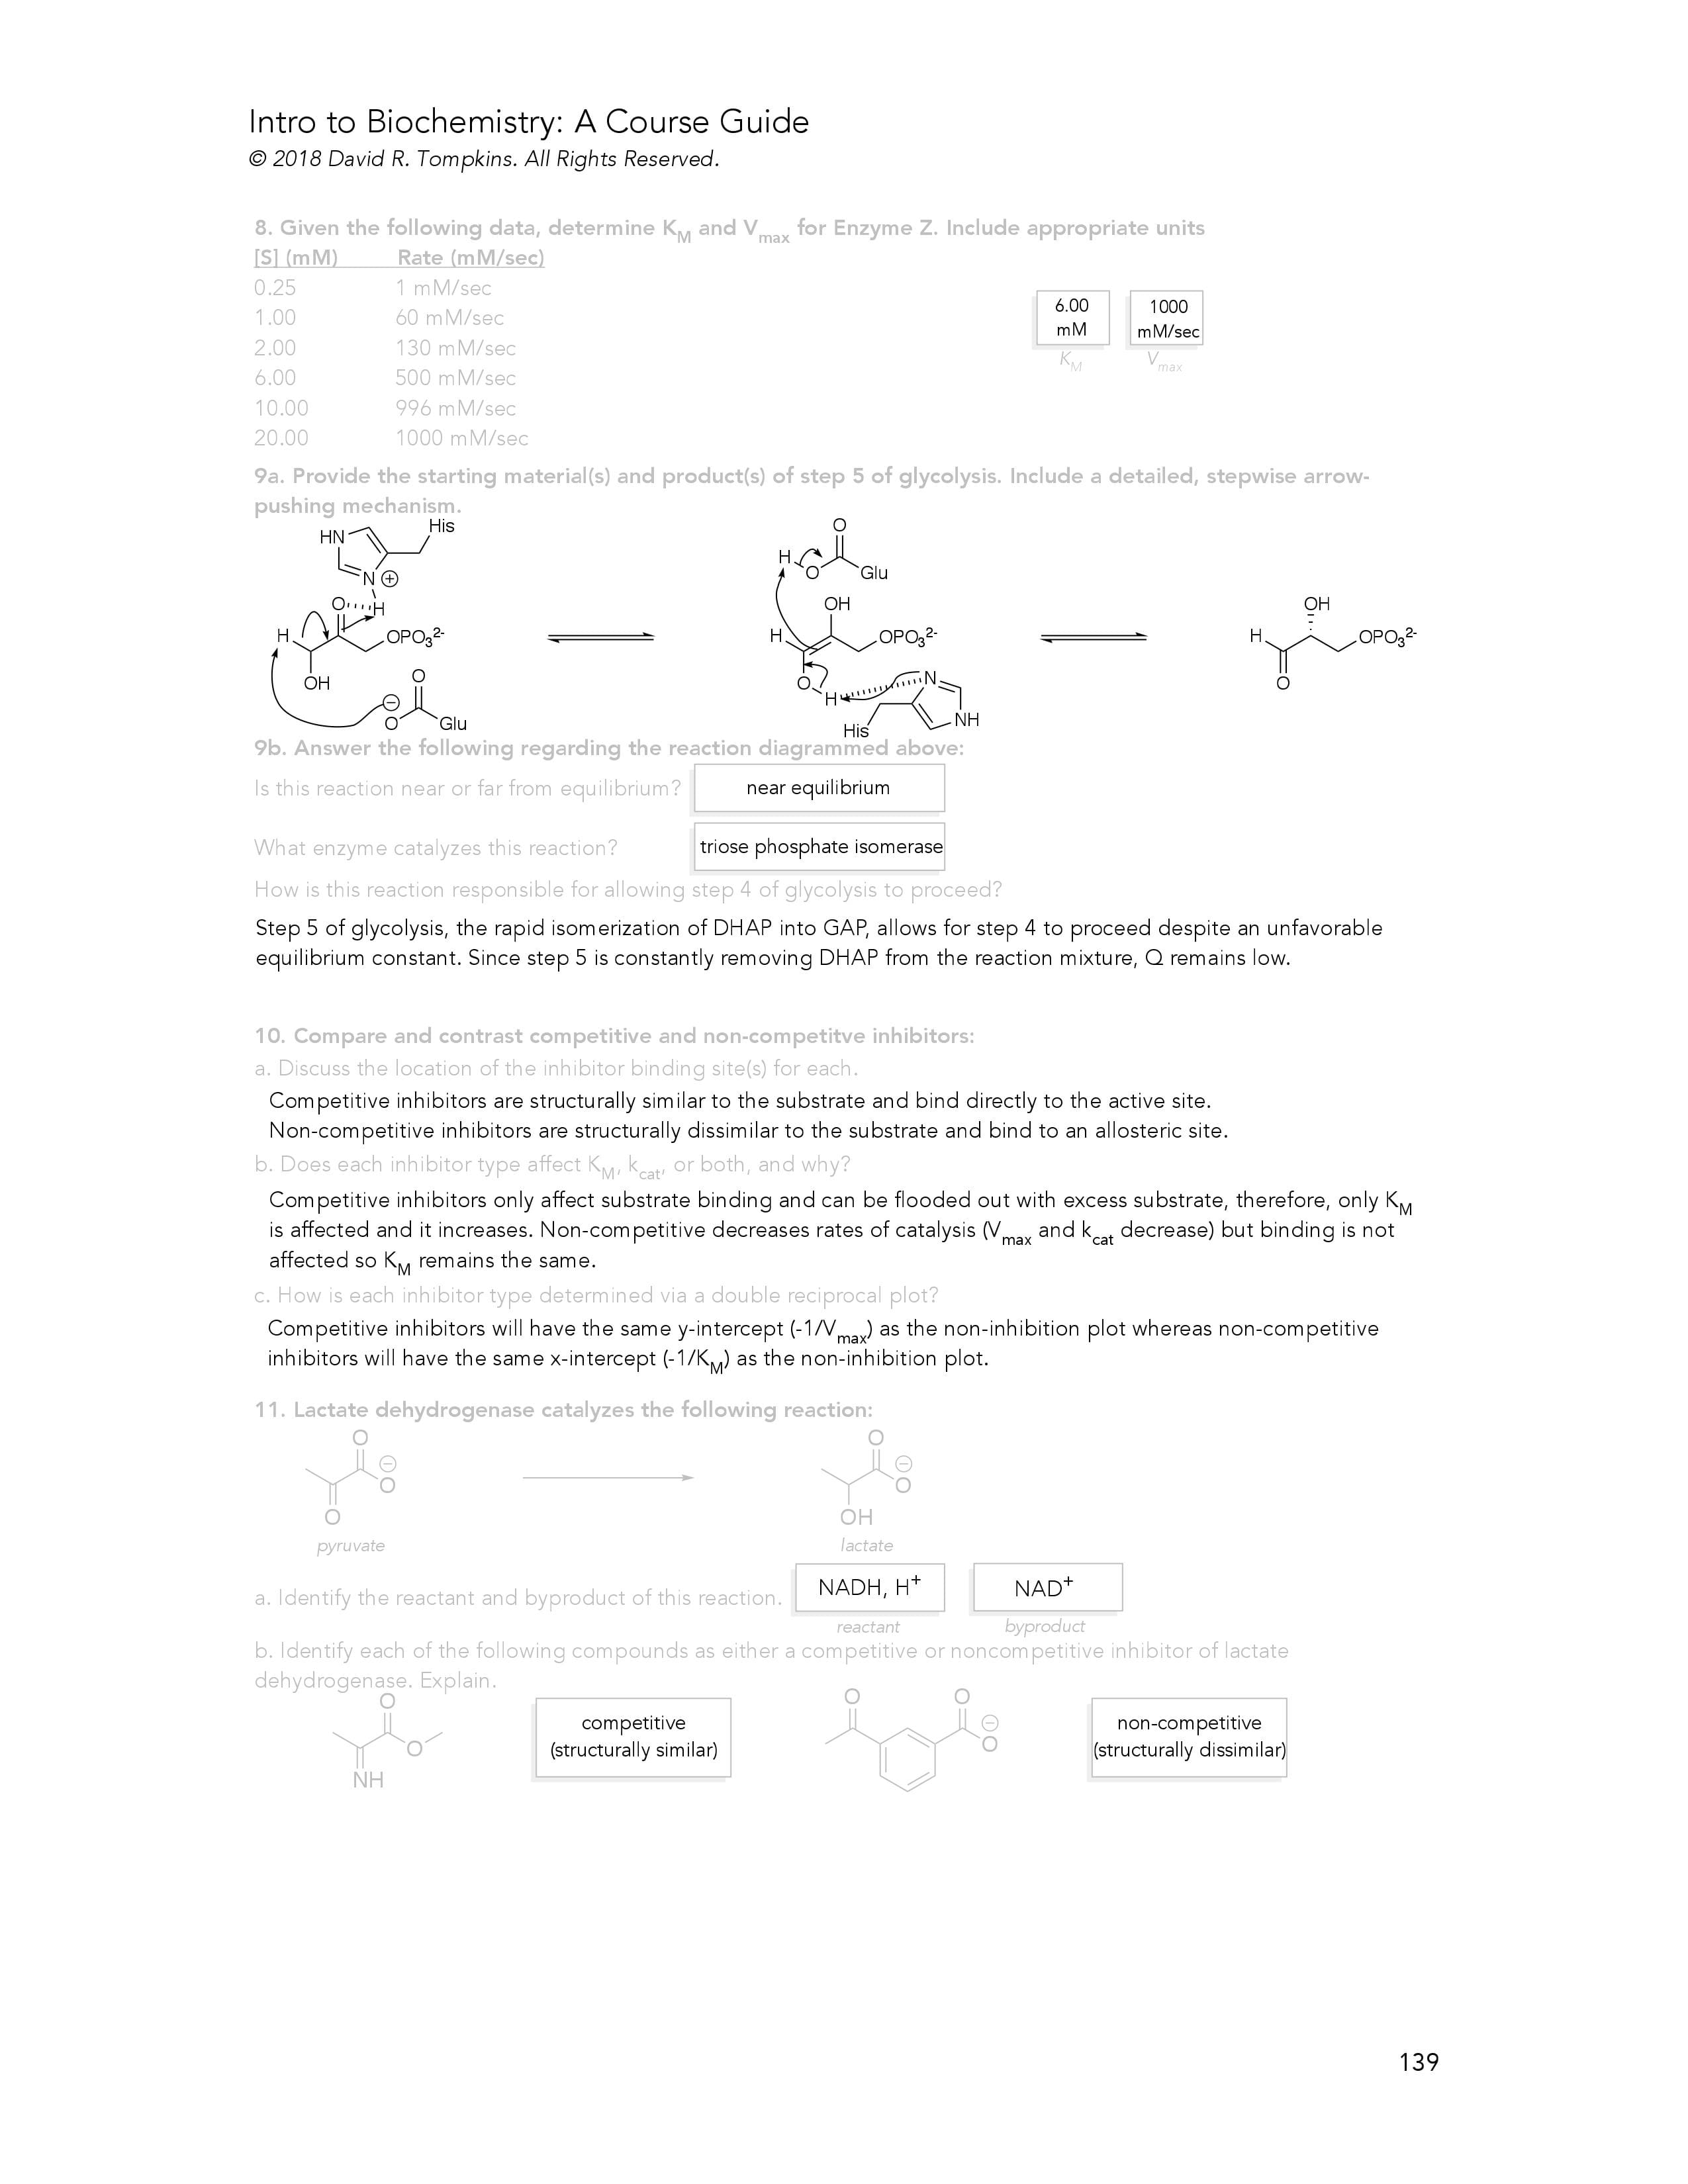 Introduction to Biochemistry Course Guide Example Page 7